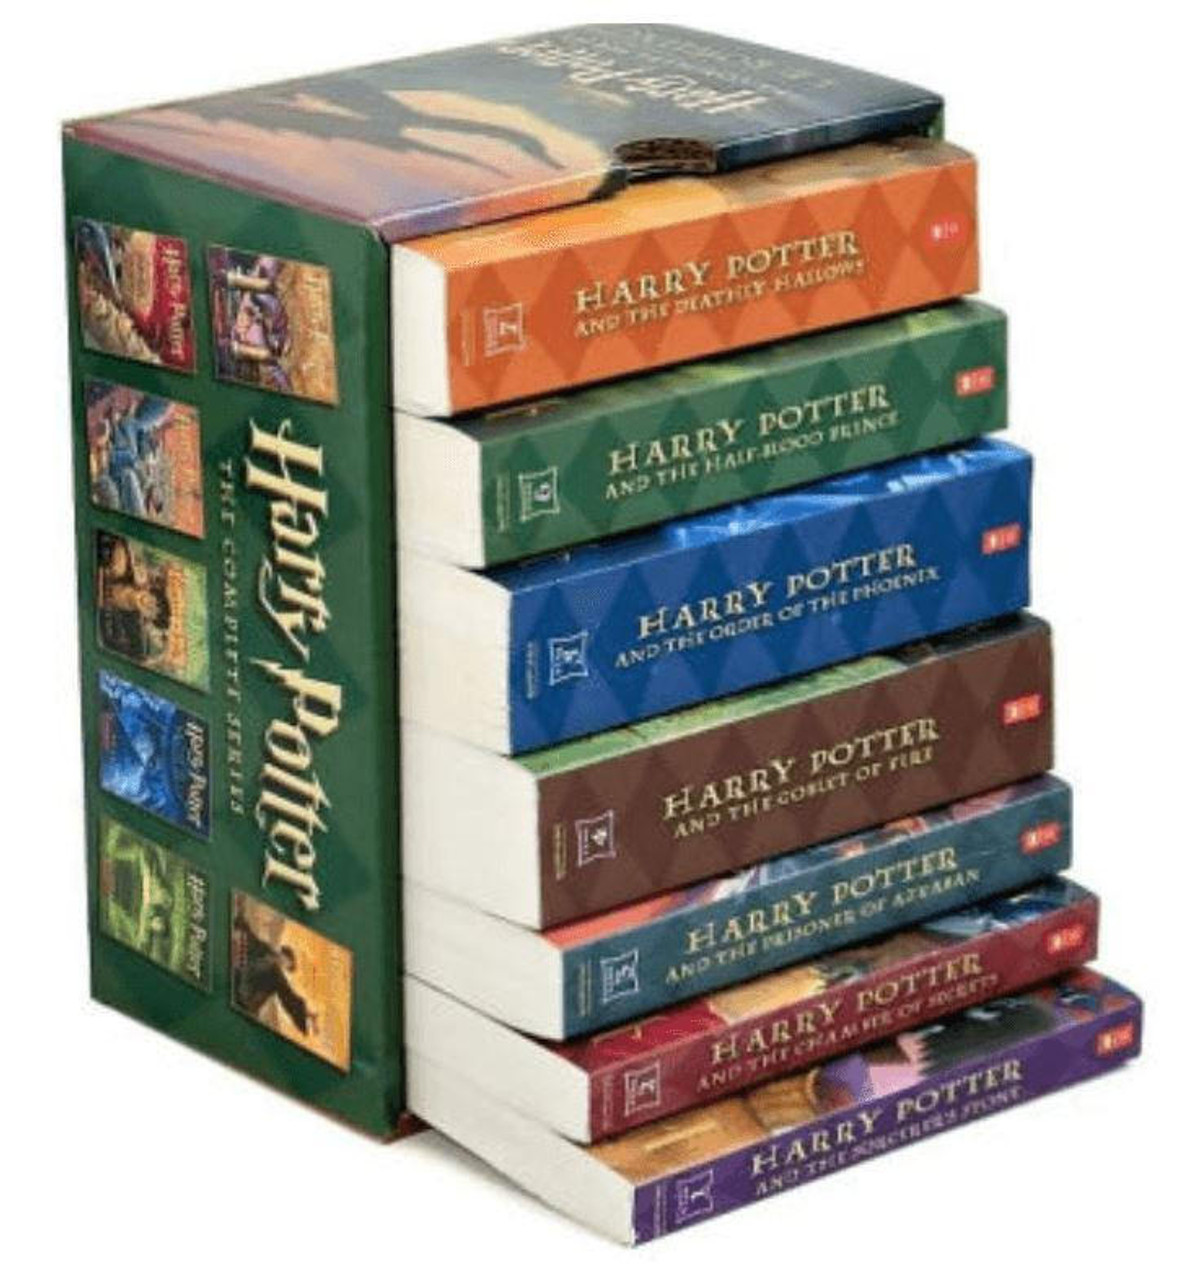 Harry Potter Paperback Boxed Set # 1-7 by J. K. Rowling